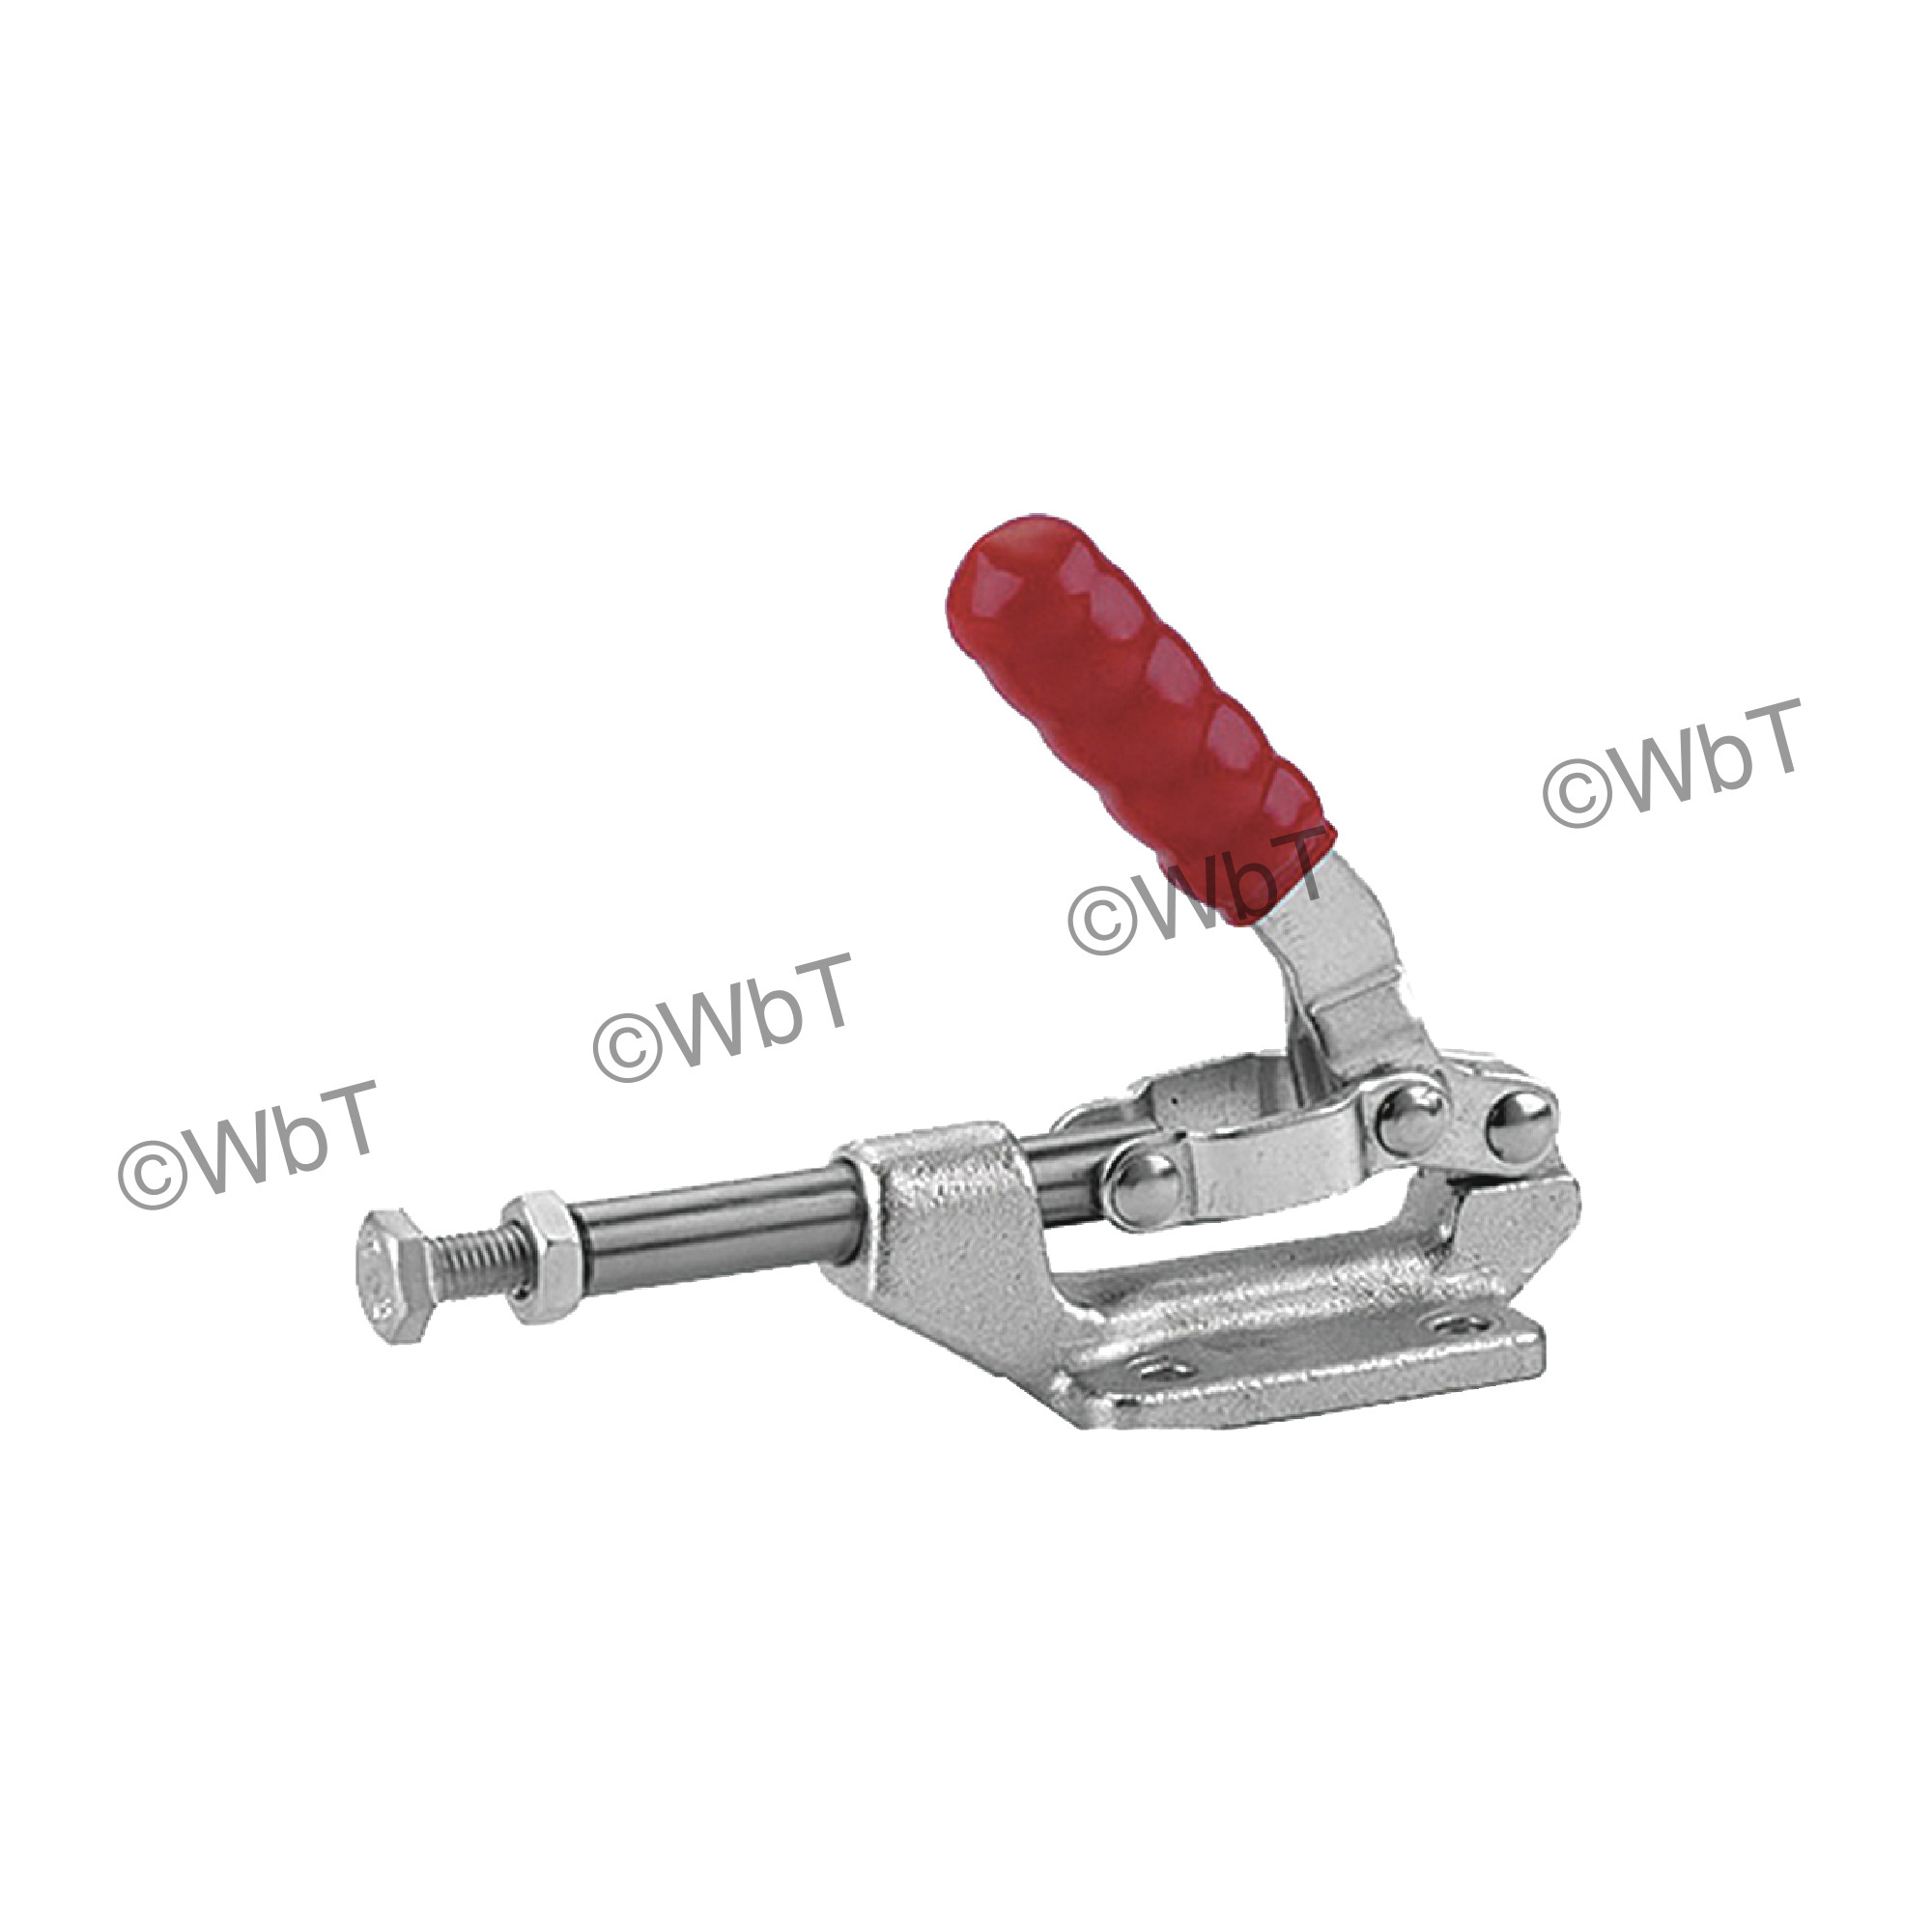 Straight Line Action Toggle Clamp